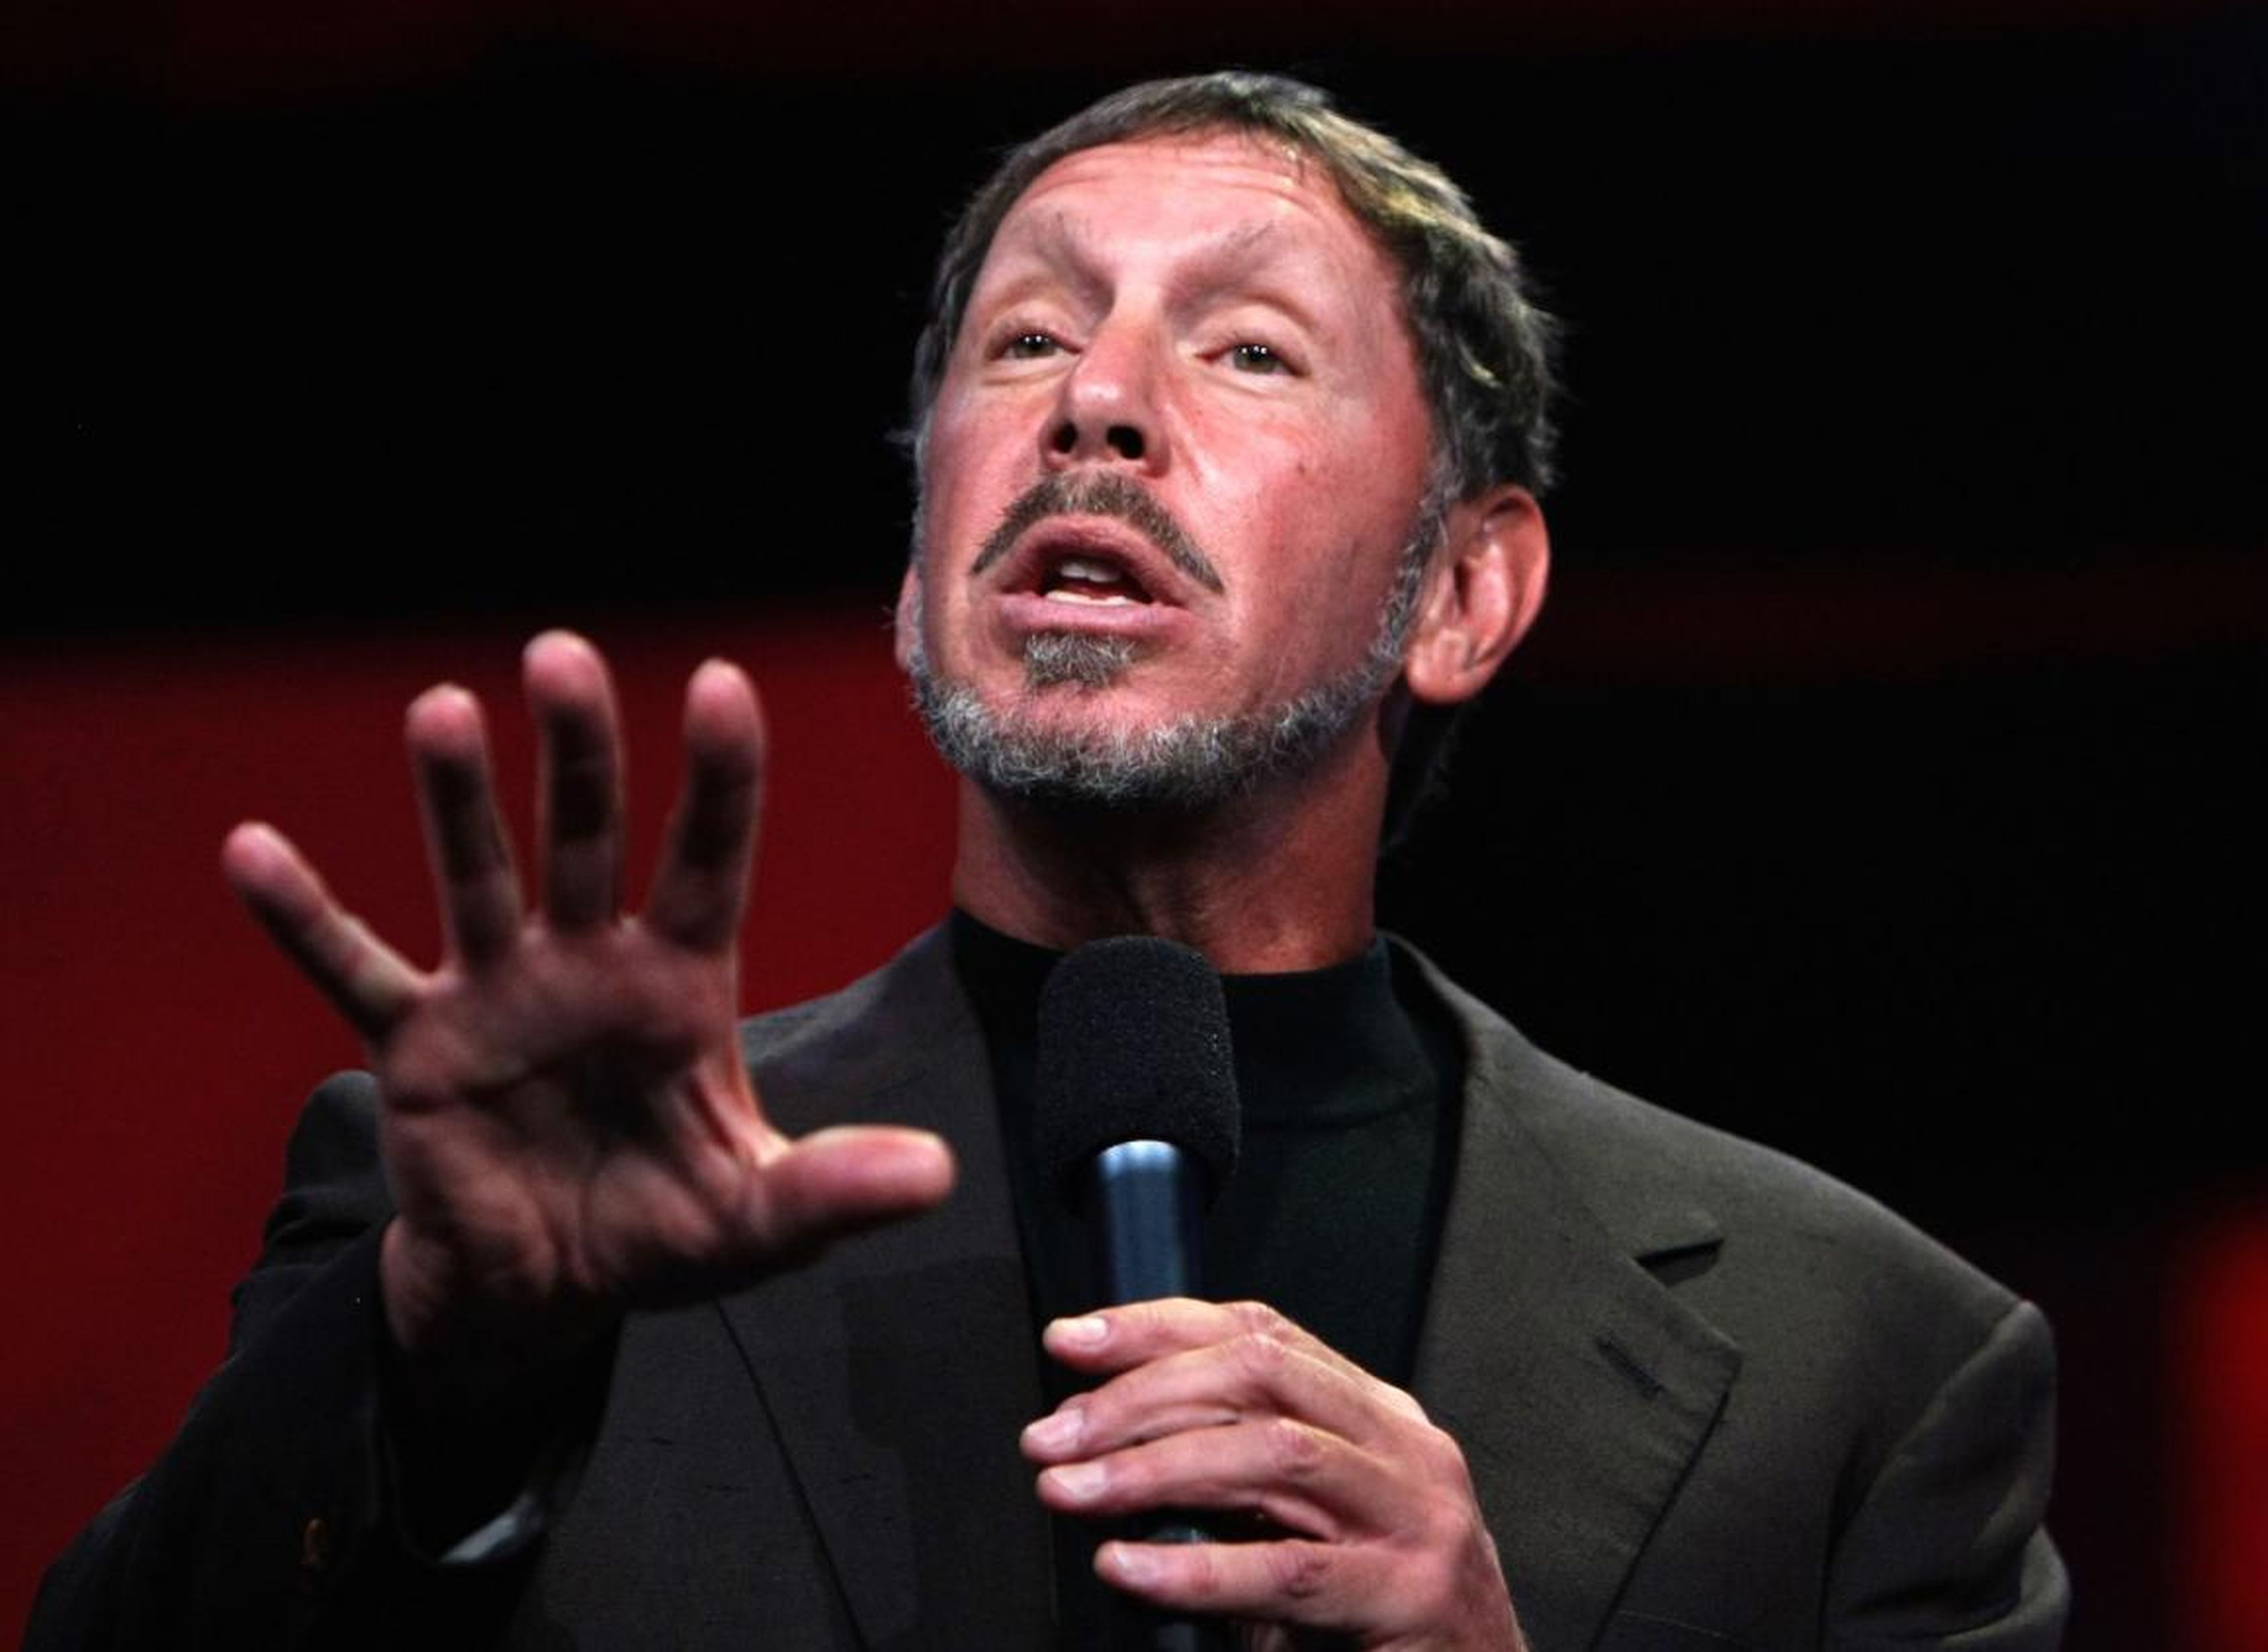 Larry Ellison, Oracle's executive chairman and a new Tesla board member, has shown he's no paragon of corporate governance.